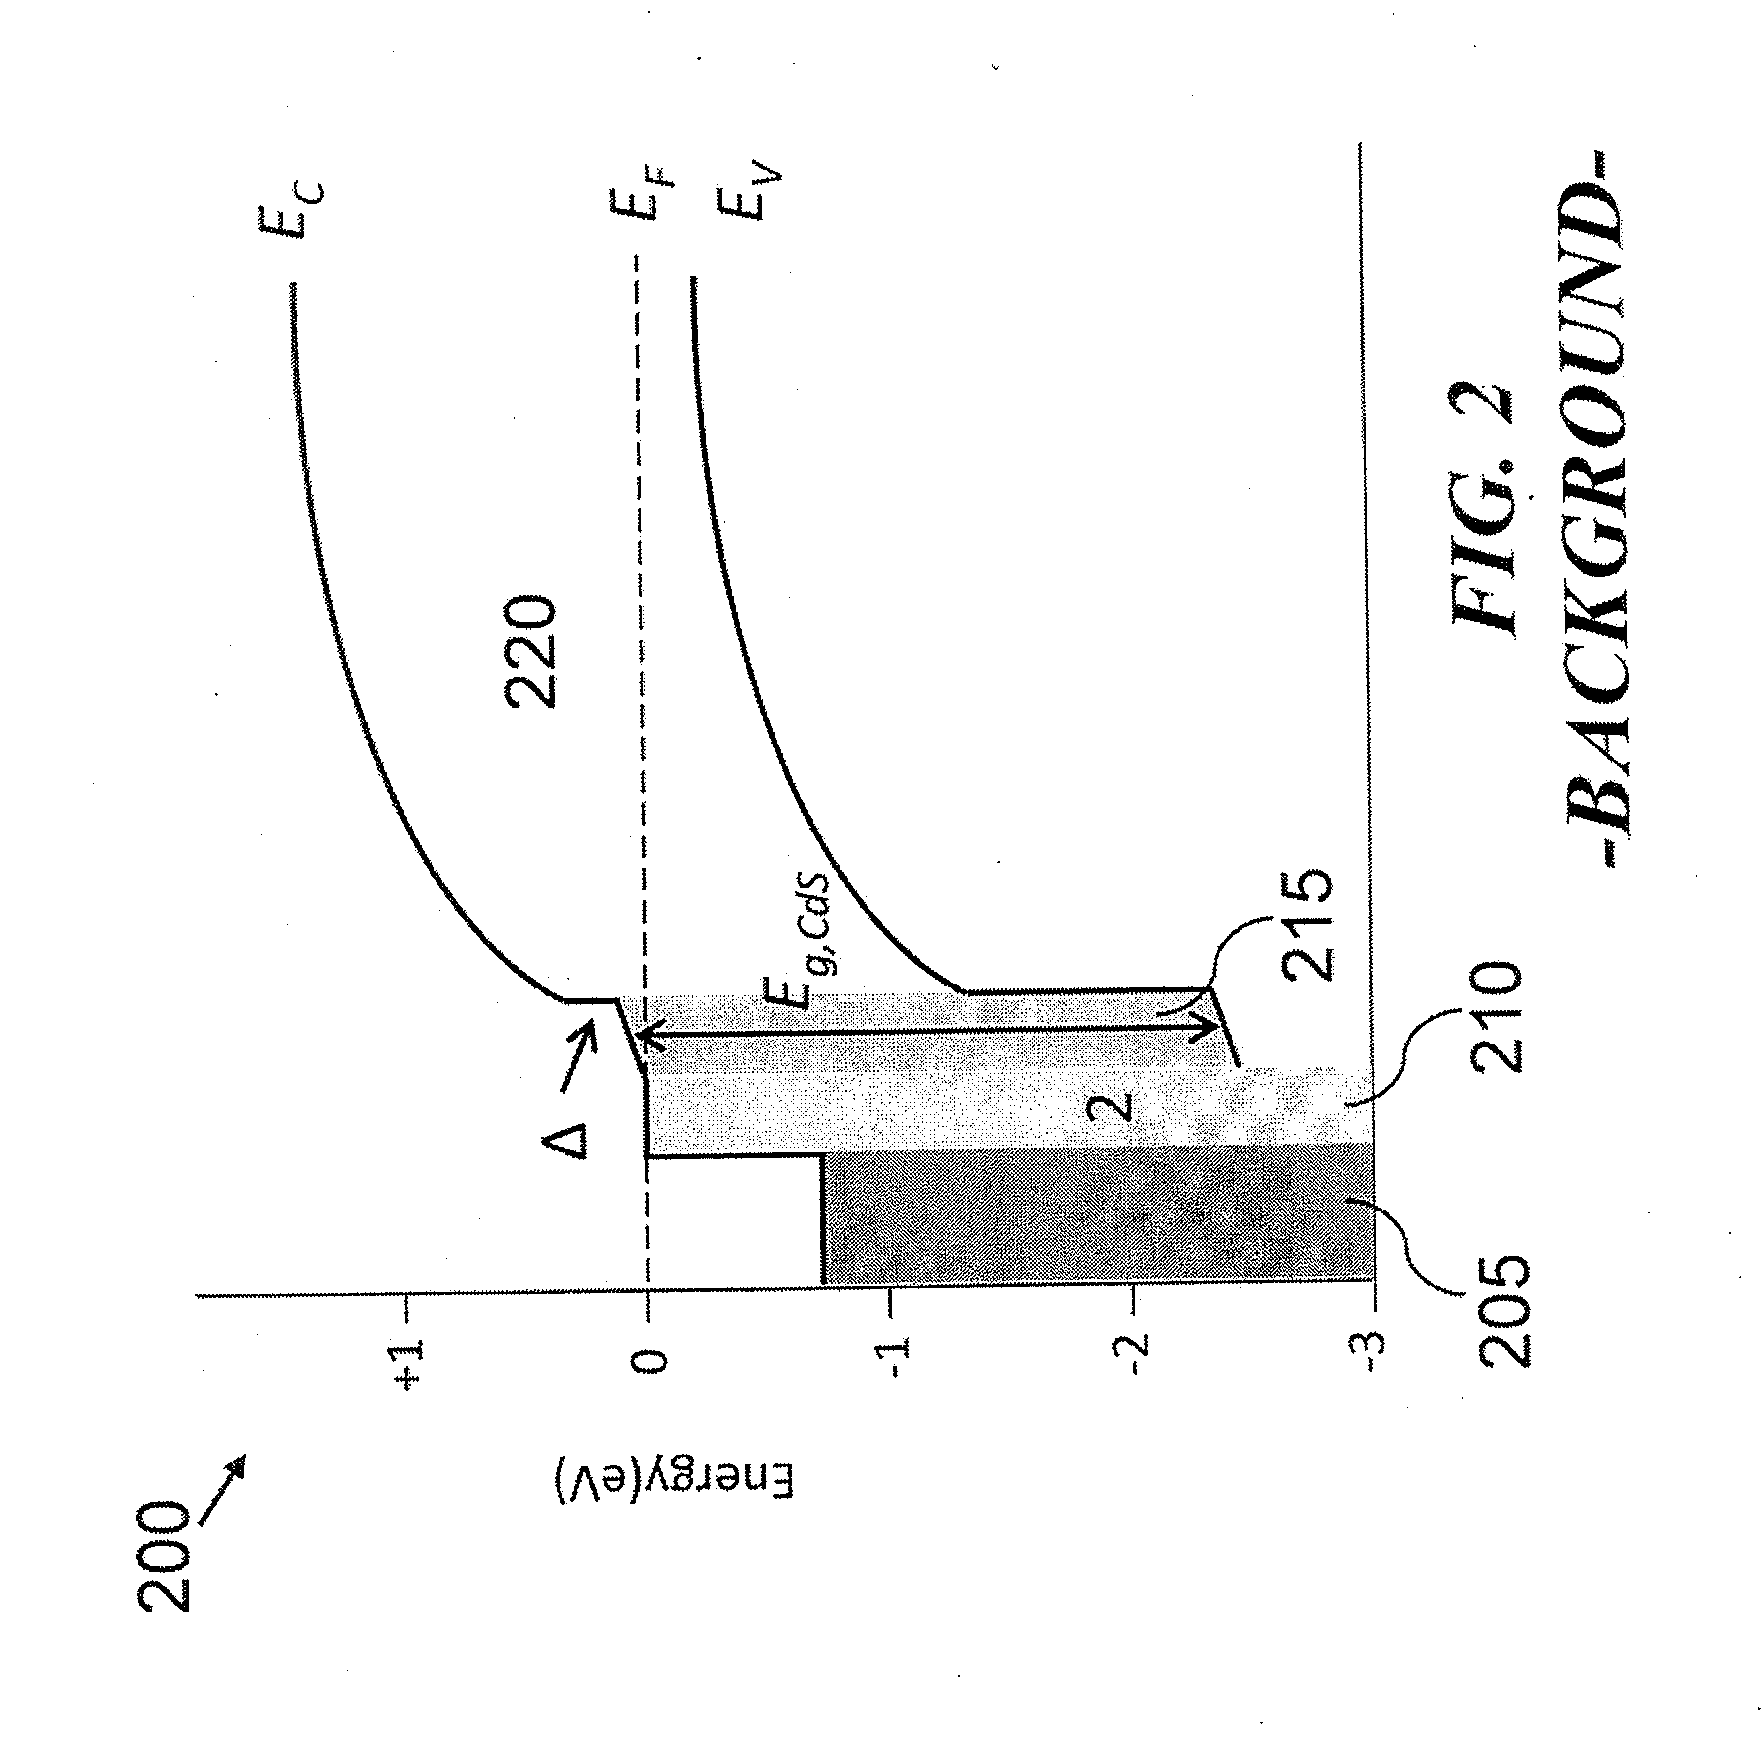 Photovoltaic device with a zinc magnesium oxide window layer